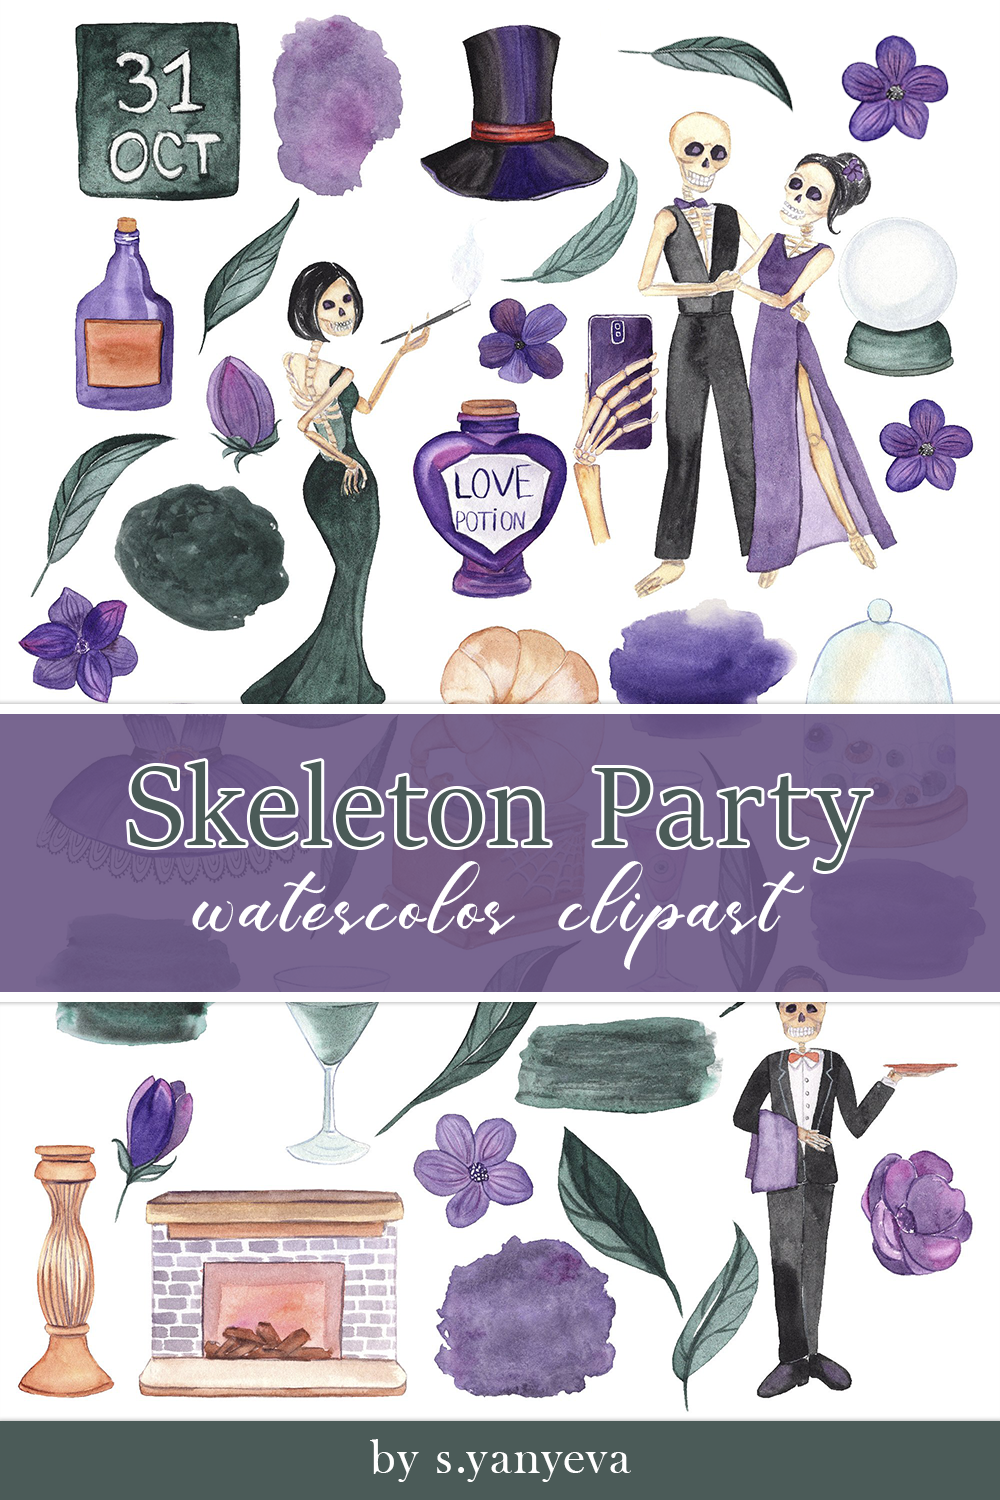 Skeleton party watercolor clipart of pinterest.